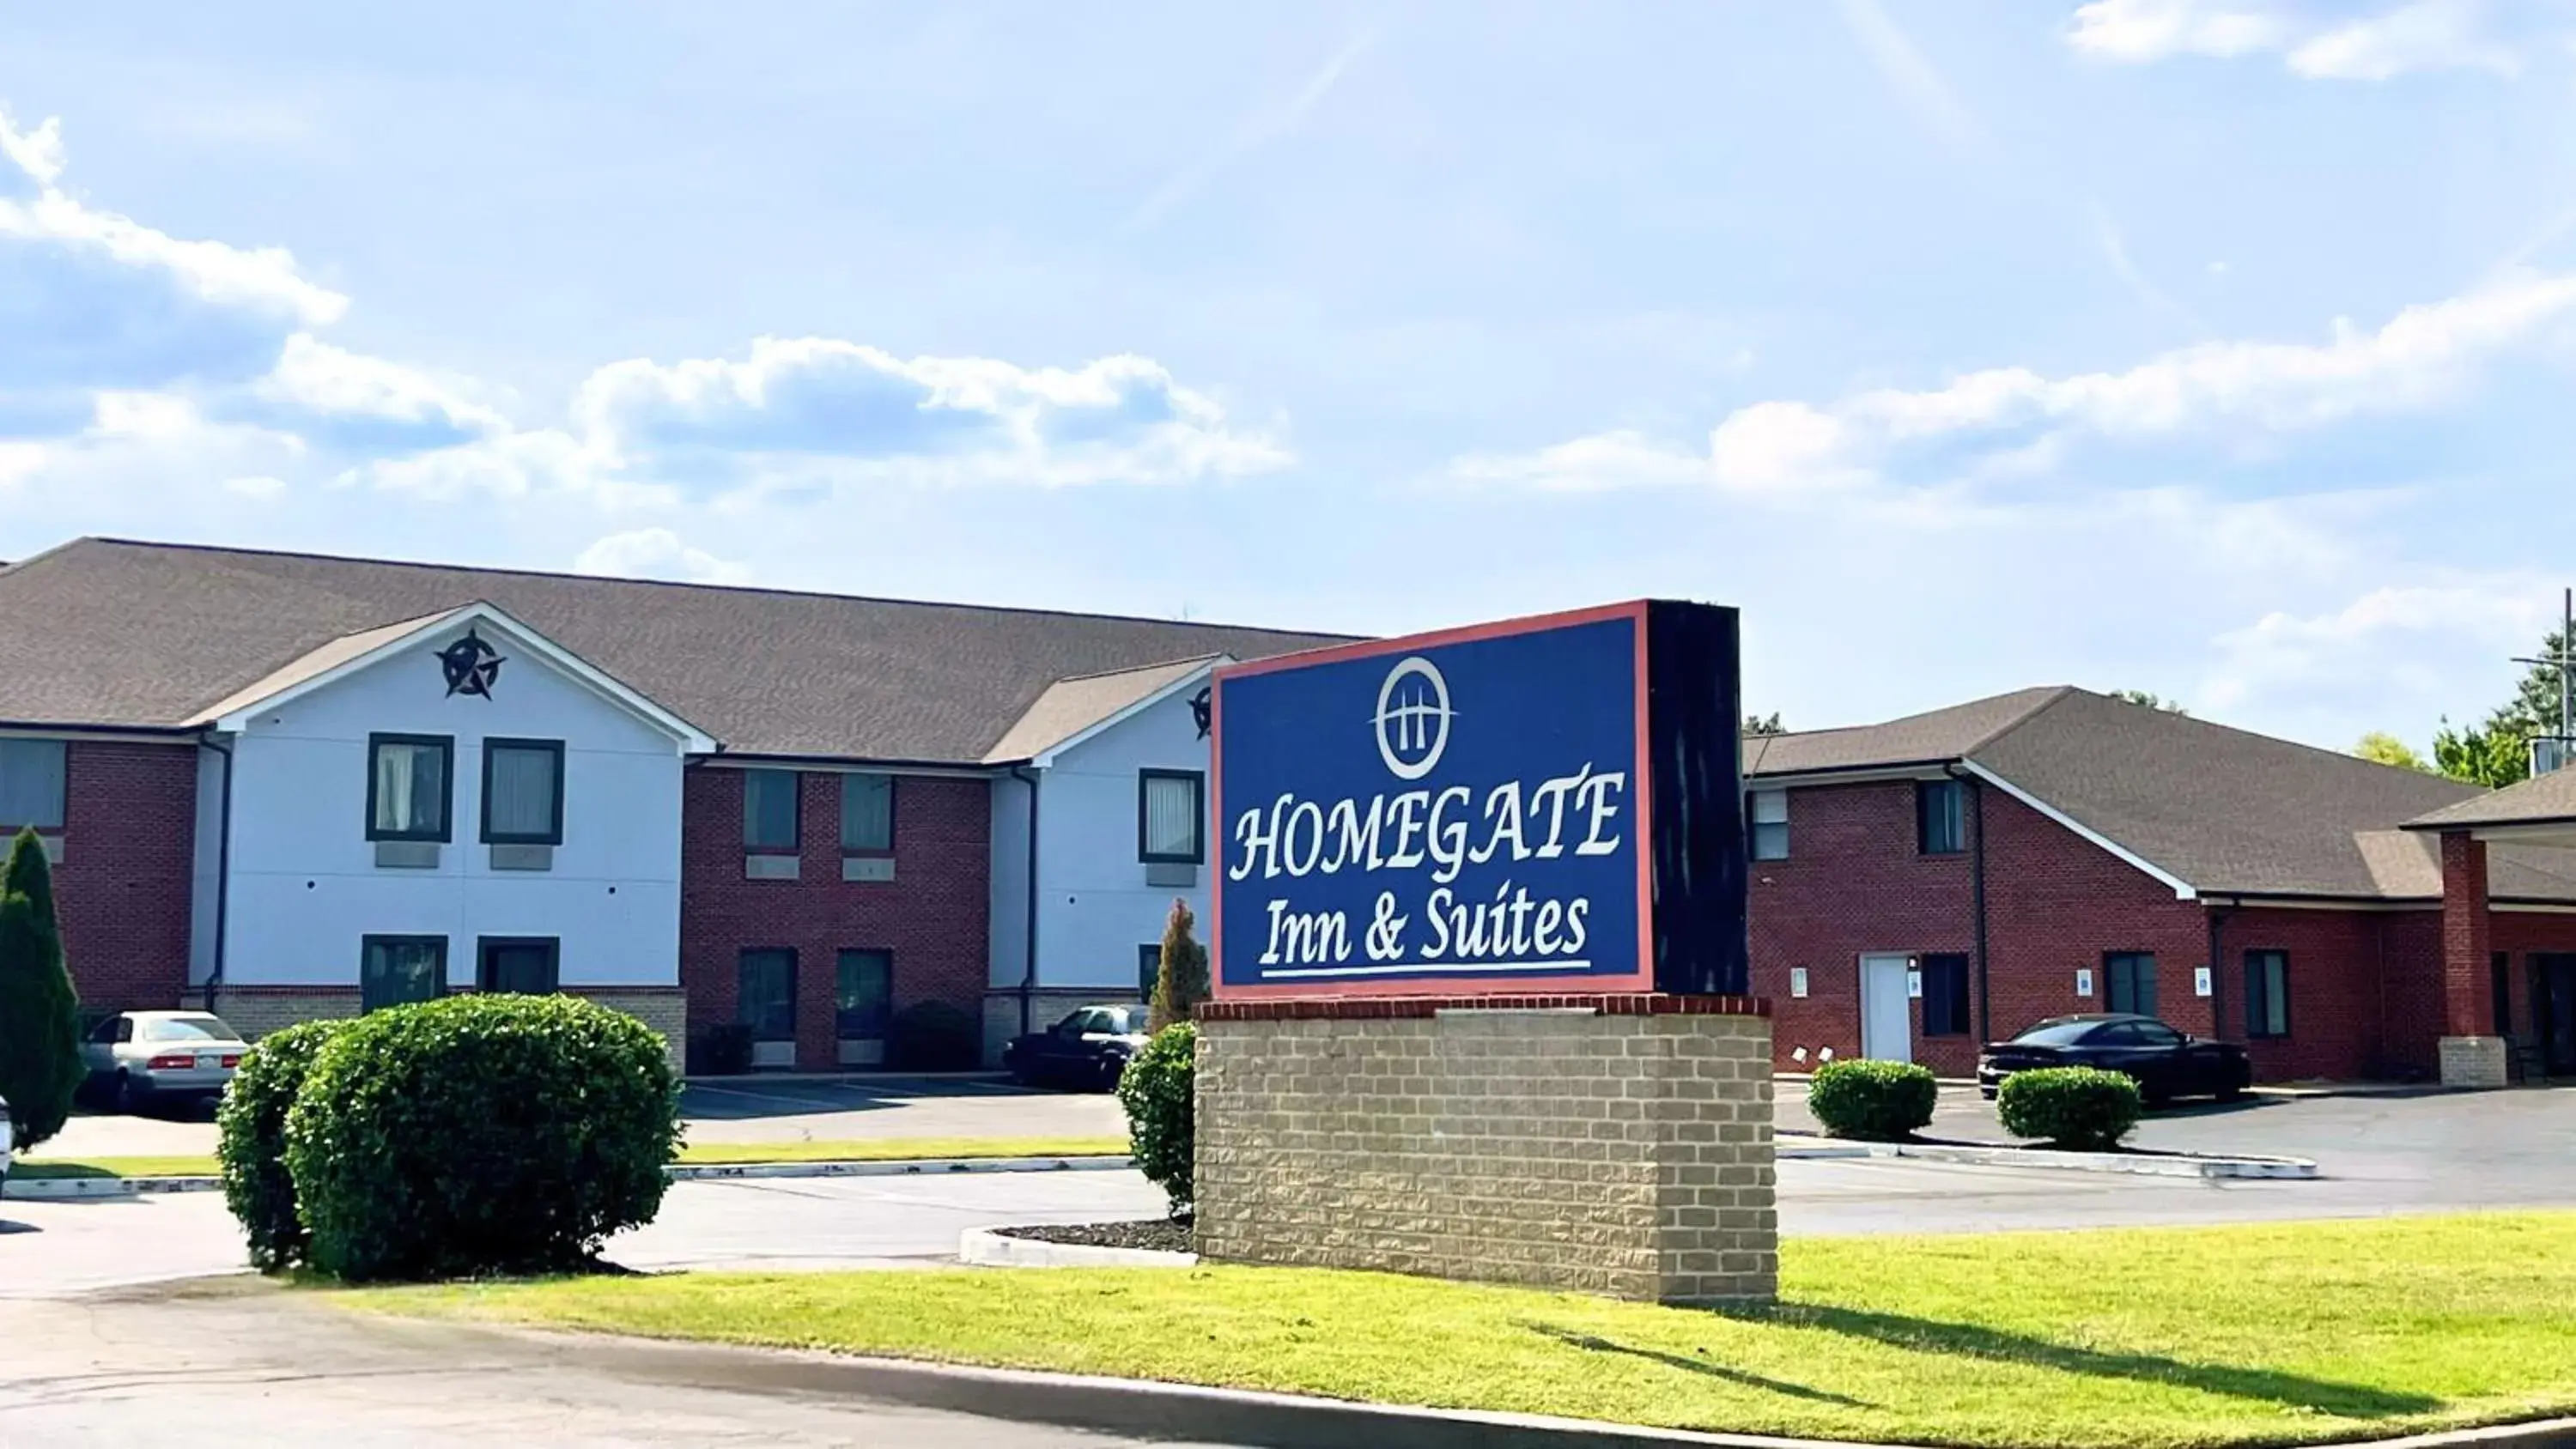 Property Building in Homegate Inn and Suites